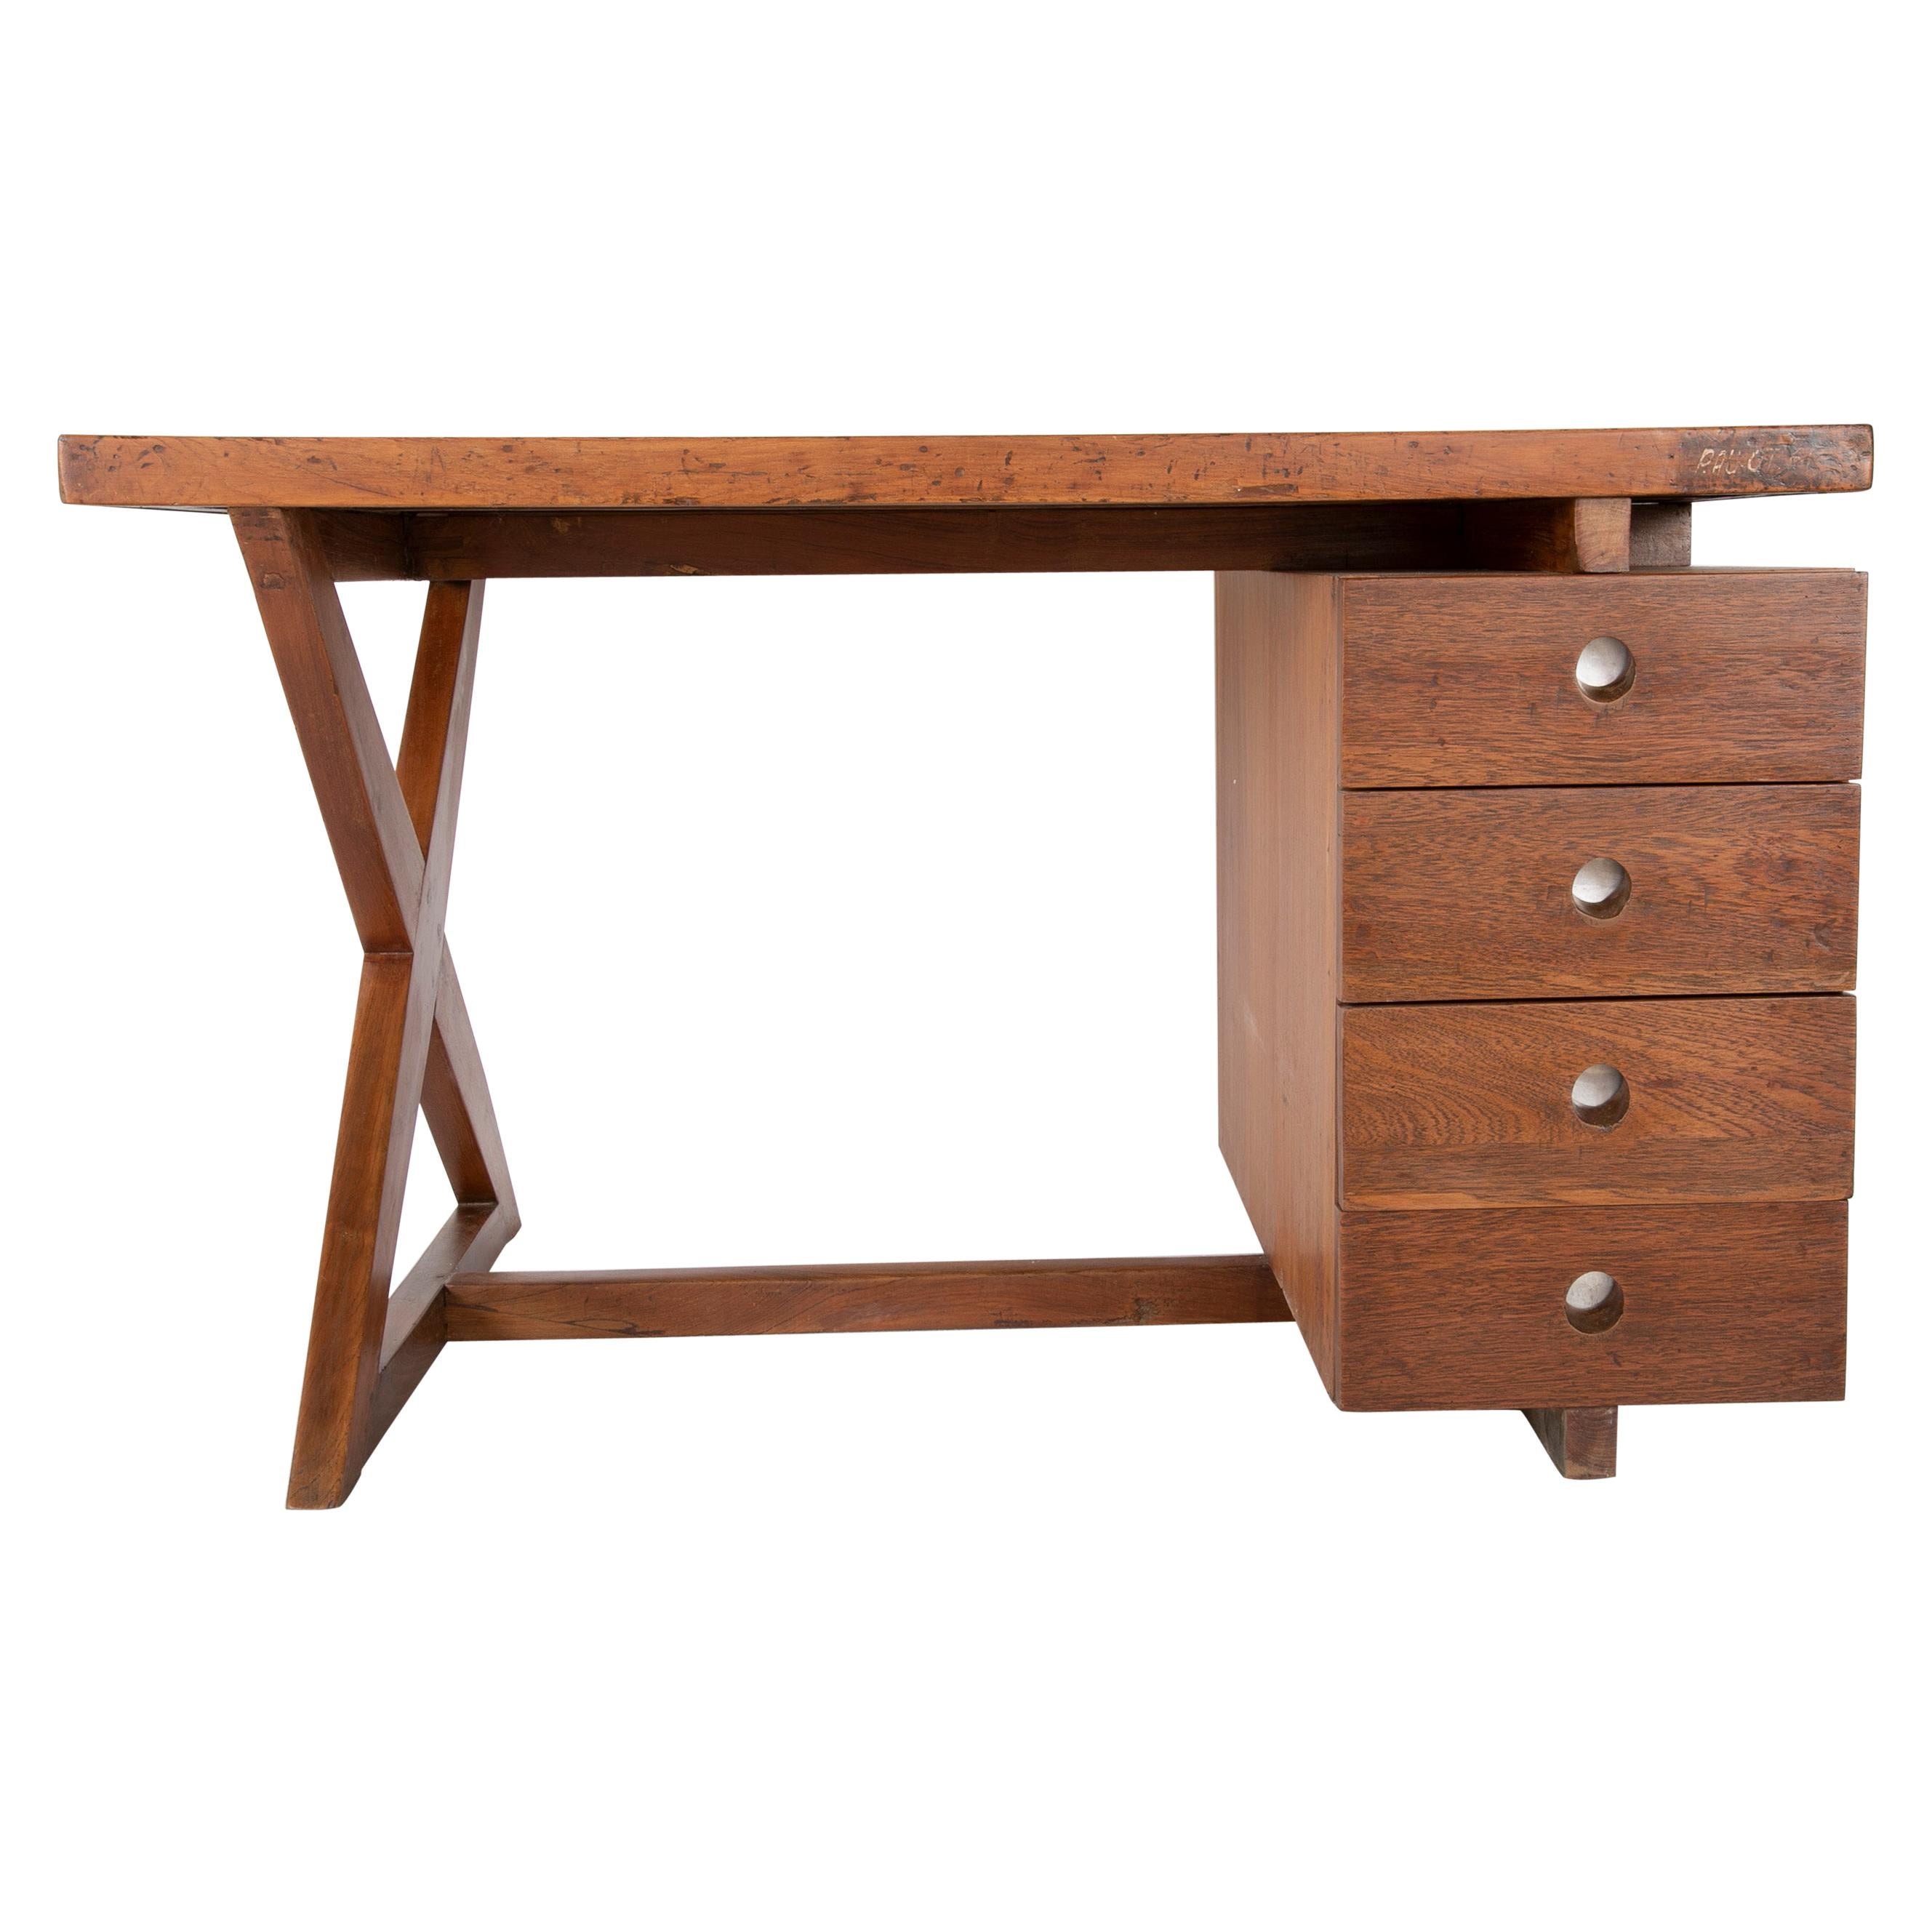 Original Pierre Jeanneret Partners Desk from the Offices of Chandigarh, India